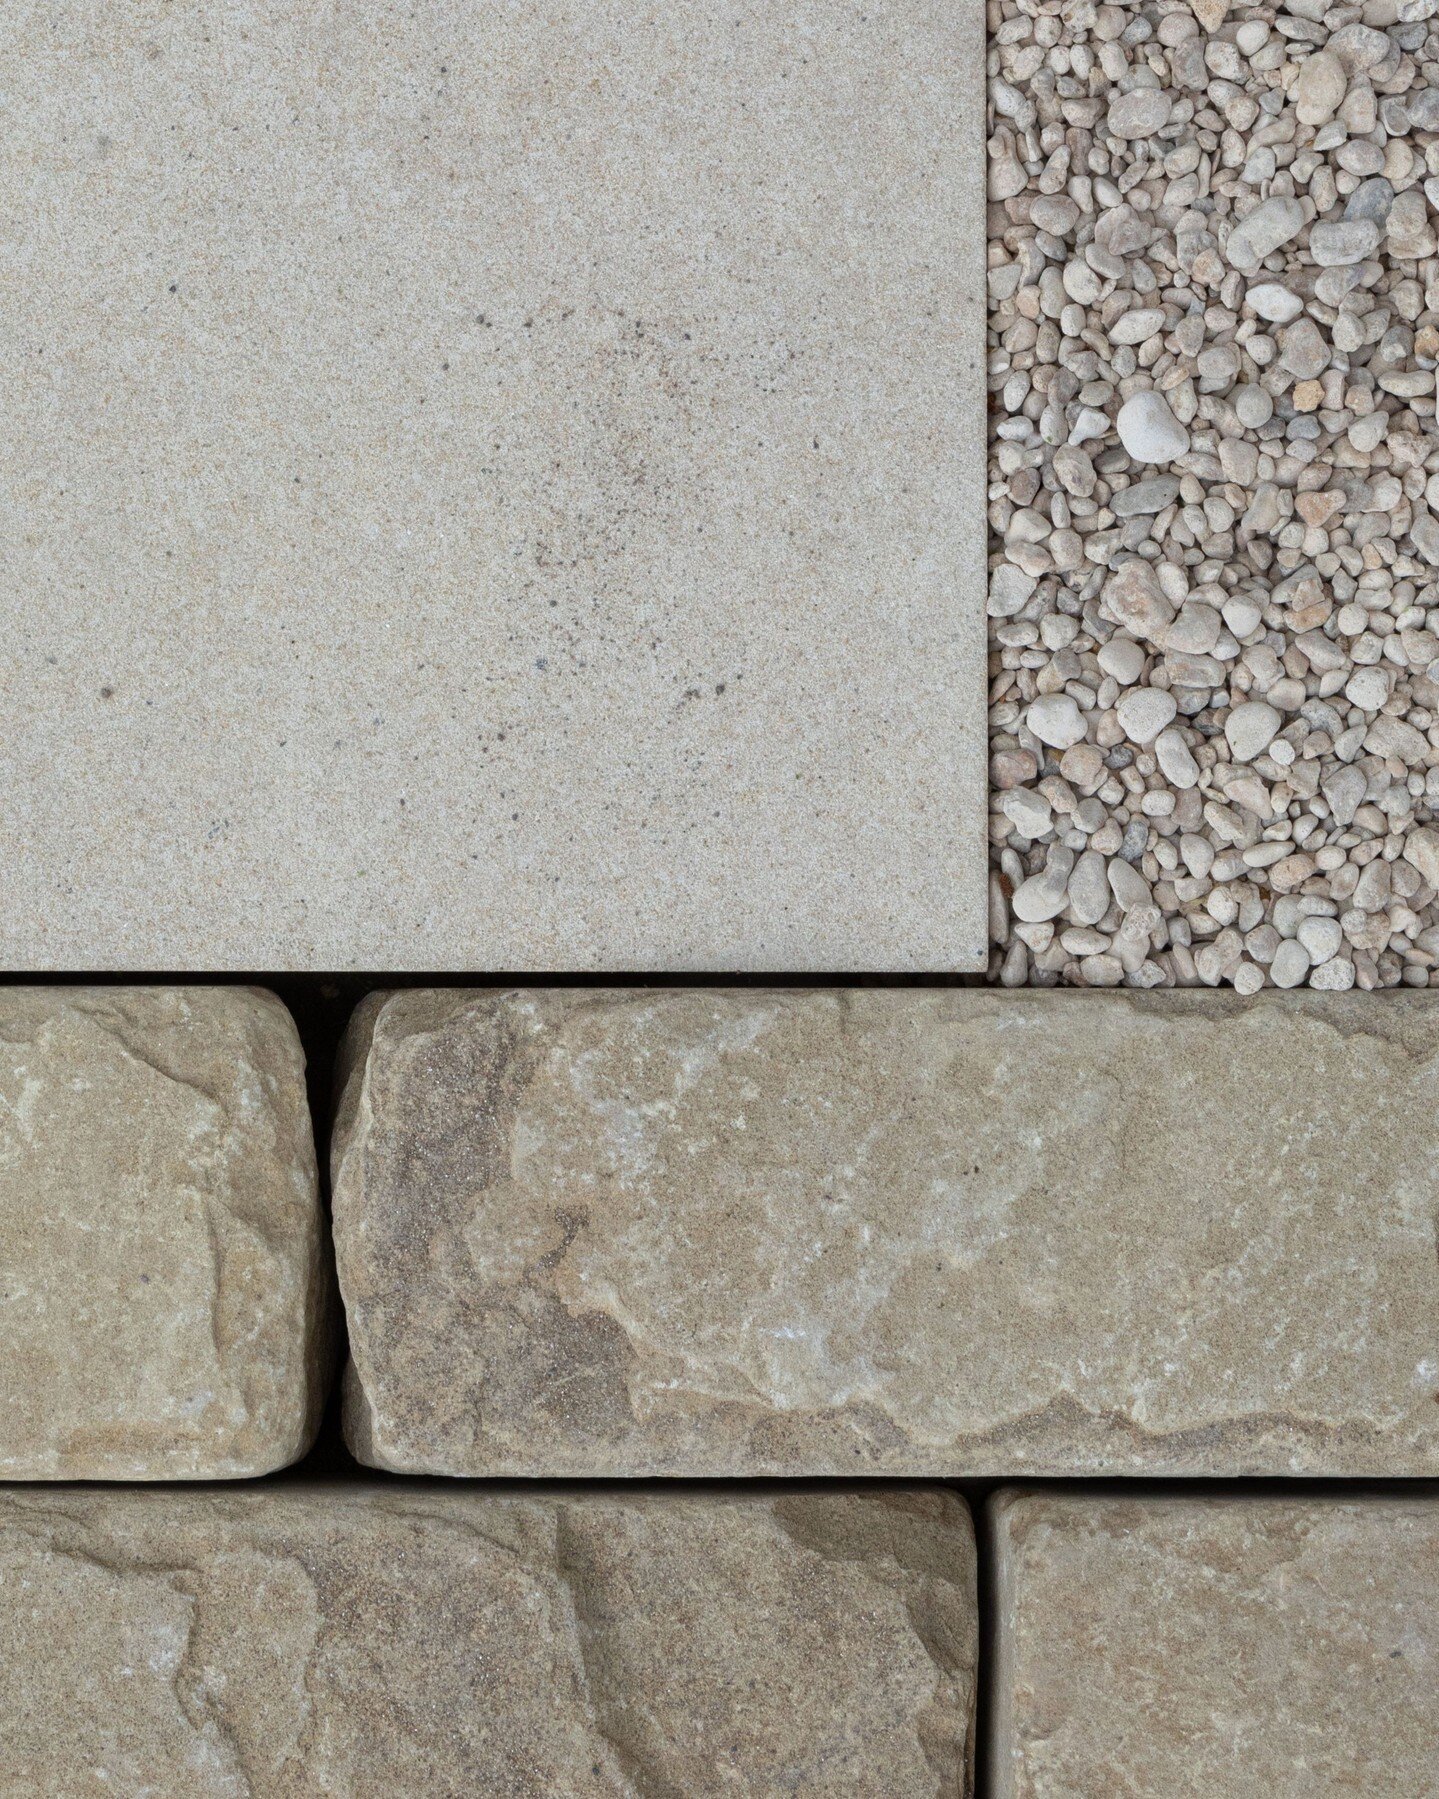 Contrasting the smooth Sawn Darley Paving with rough textured Darley Stableyard Cobbles &amp; Cotswold Pebbles for the first moodboard of April.
What's your favorite combination of textures?

Allgreen. Masters In Stone. 

#moodboard #materials #palle